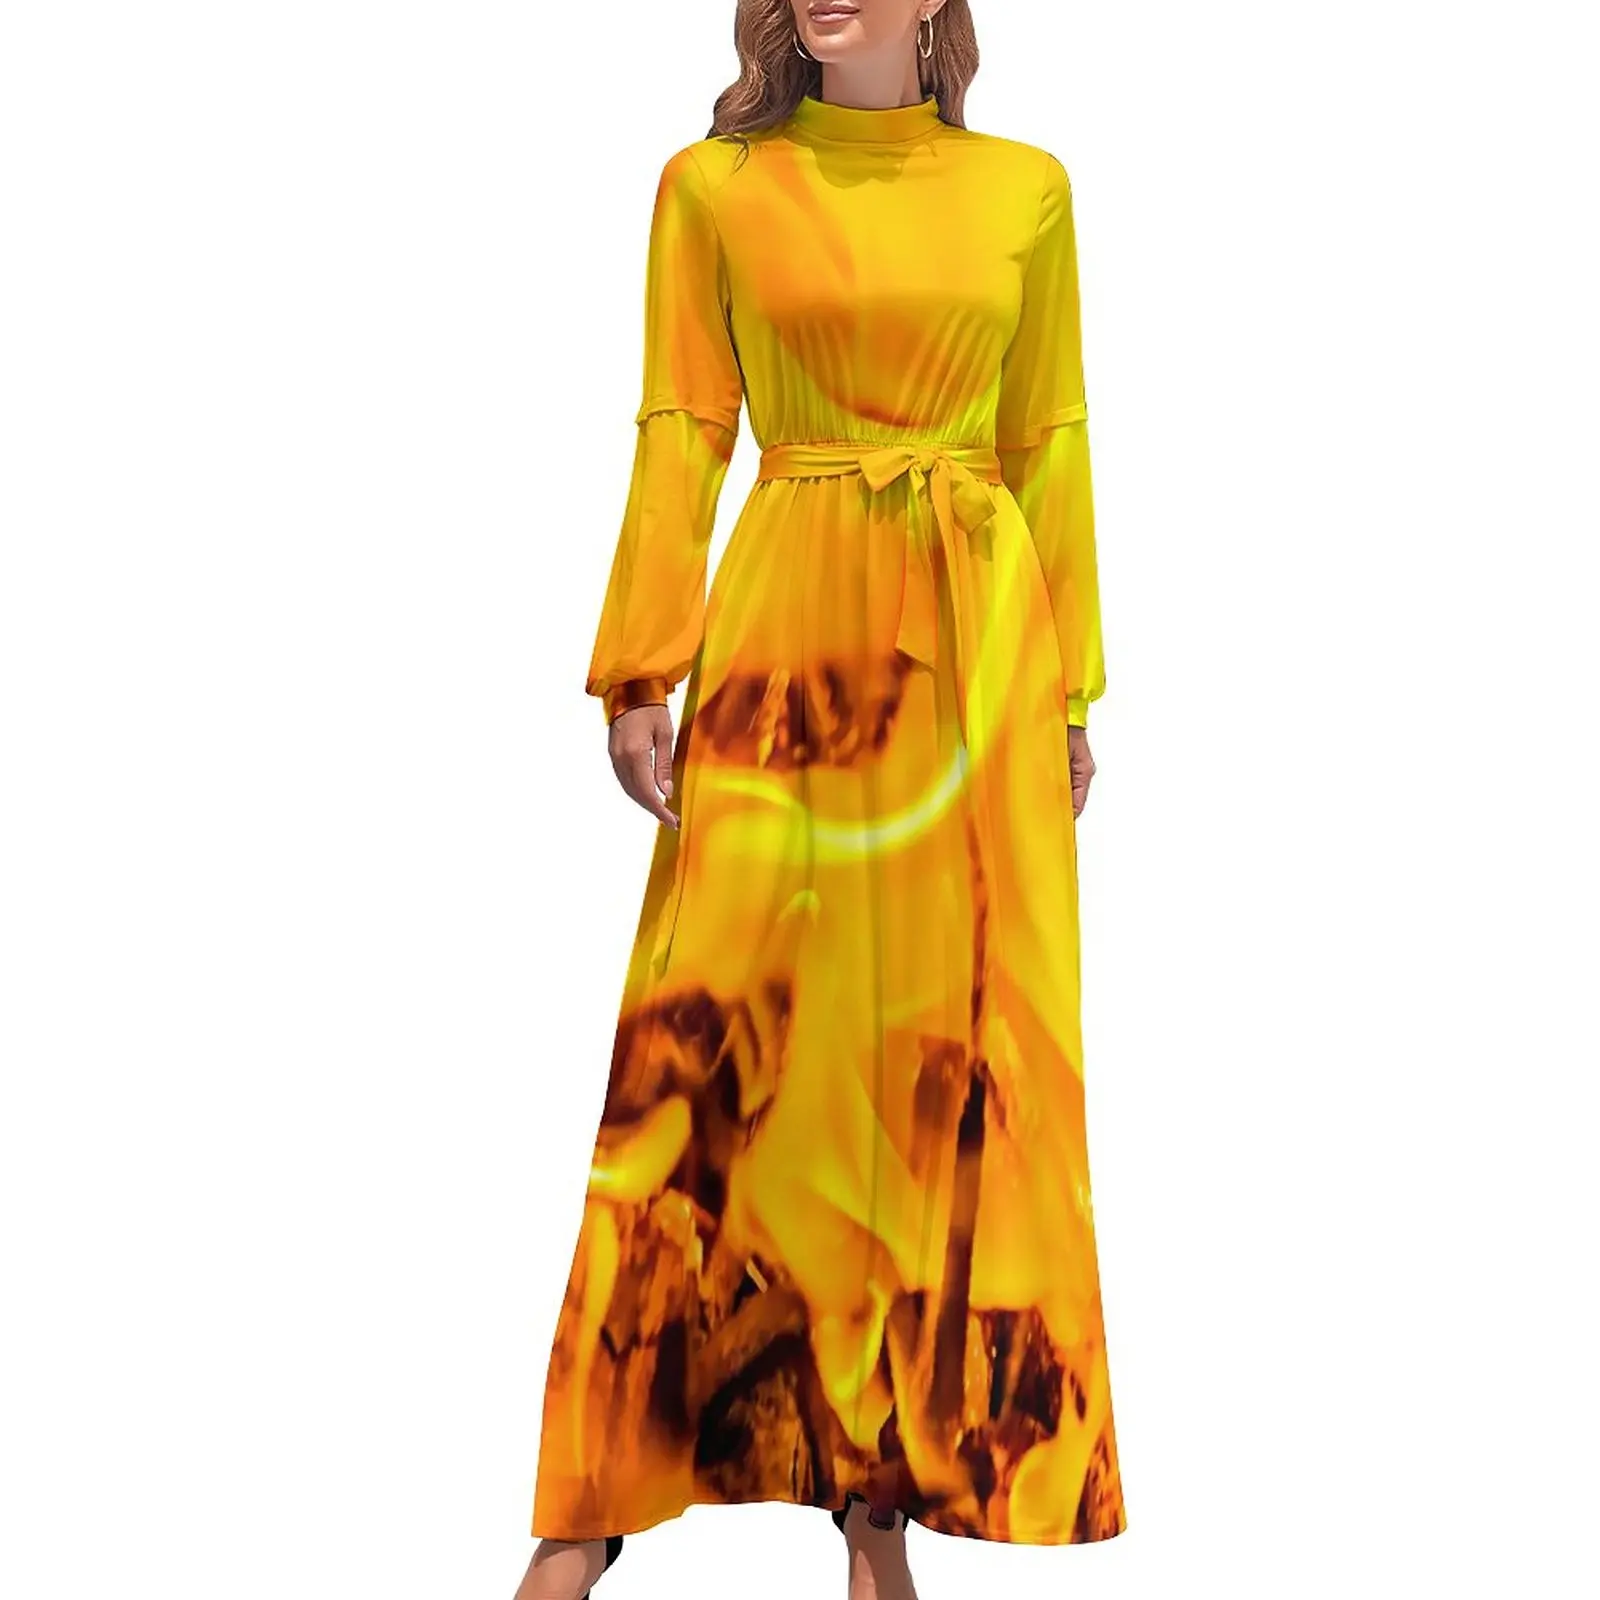 

Fire And Flames Dress High Neck Abstract Print Graphic Bohemia Dresses Long Sleeve Korean Fashion Long Maxi Dress Sexy Clothing